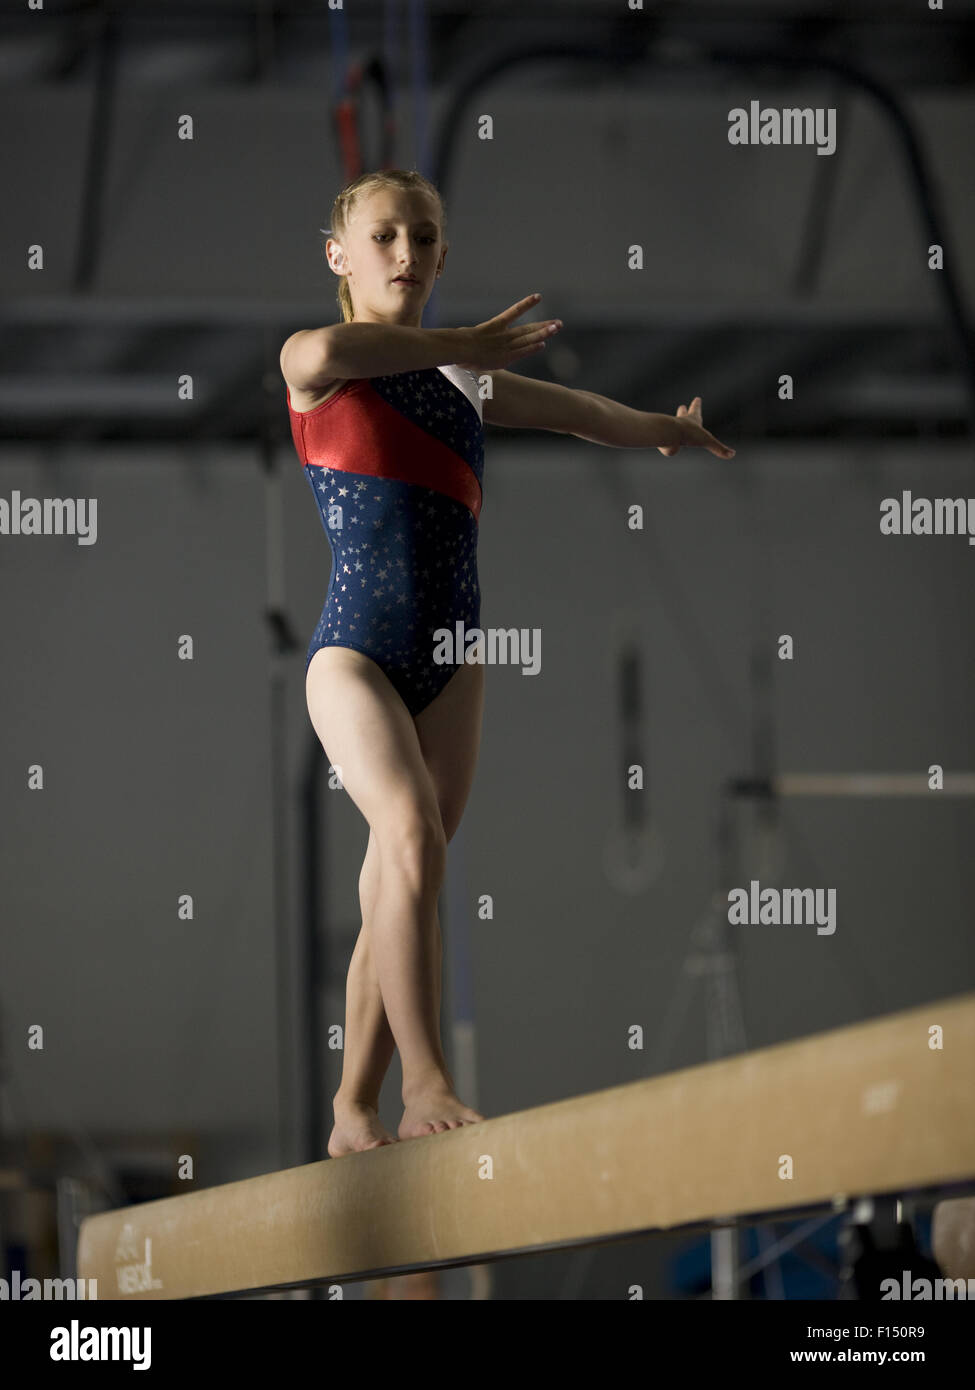 How Women's Balance Beam Went From Simple Grace to Dazzling Aerial Movements